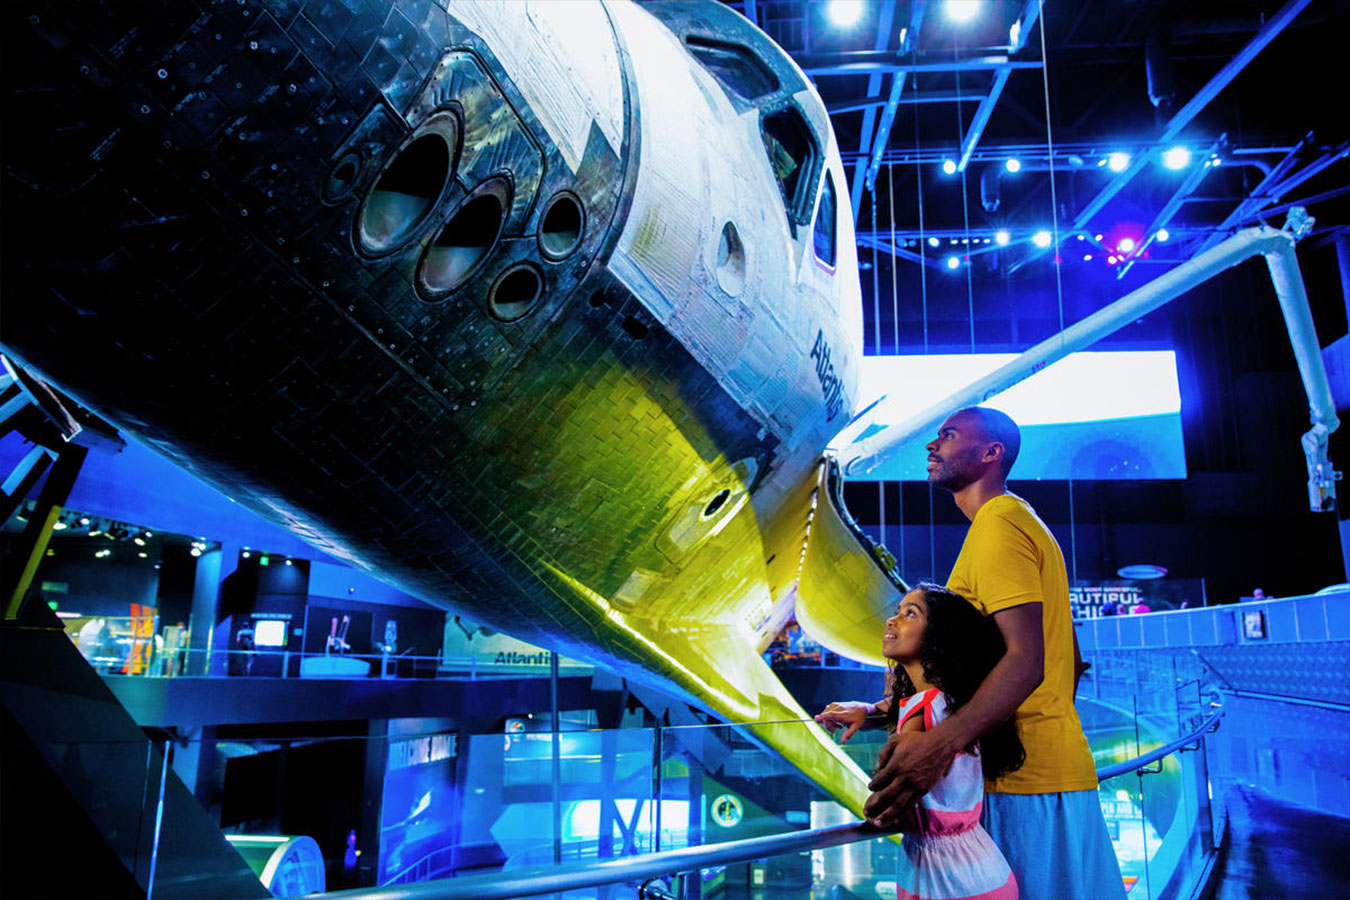 Father and daughter look up at the Space Shuttle Atlantis Orbiter on display with payload bay doors open at the Kennedy Space Center Visitor Complex.